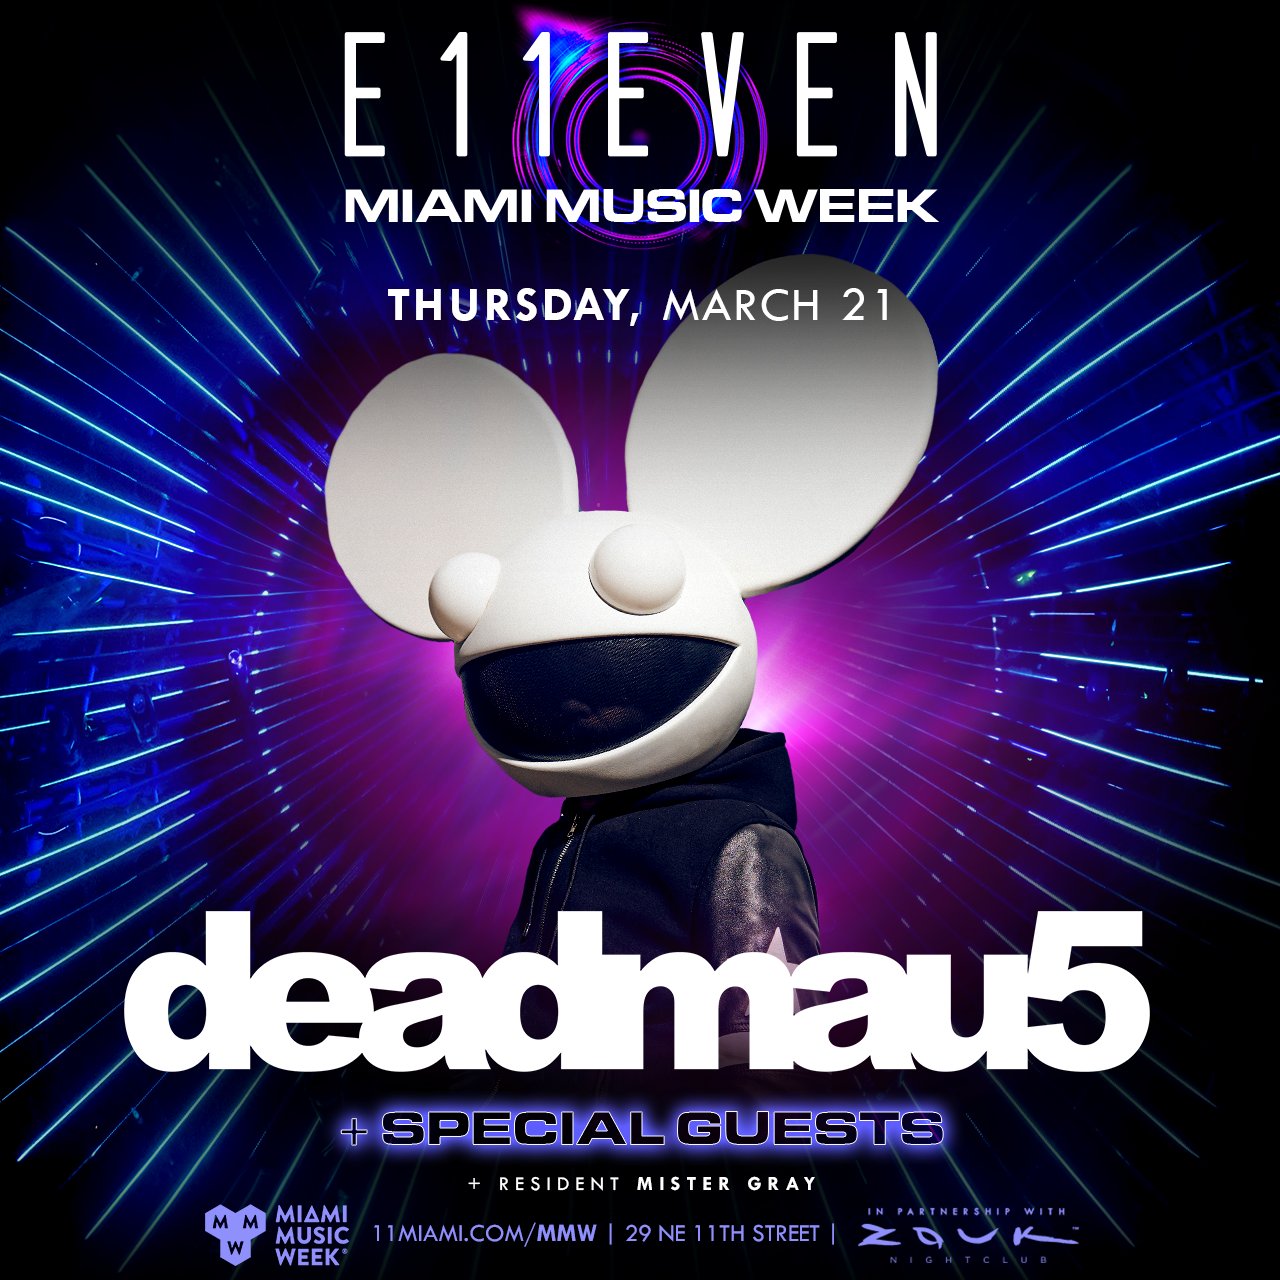 E11EVEN MIAMI on X: "E11EVEN MIAMI MUSIC WEEK 🪩 The mouse is in the house  for #MMW2023 @deadmau5 + specials guests at #E11EVEN Thursday, March 21  Tickets & tables link in bio /